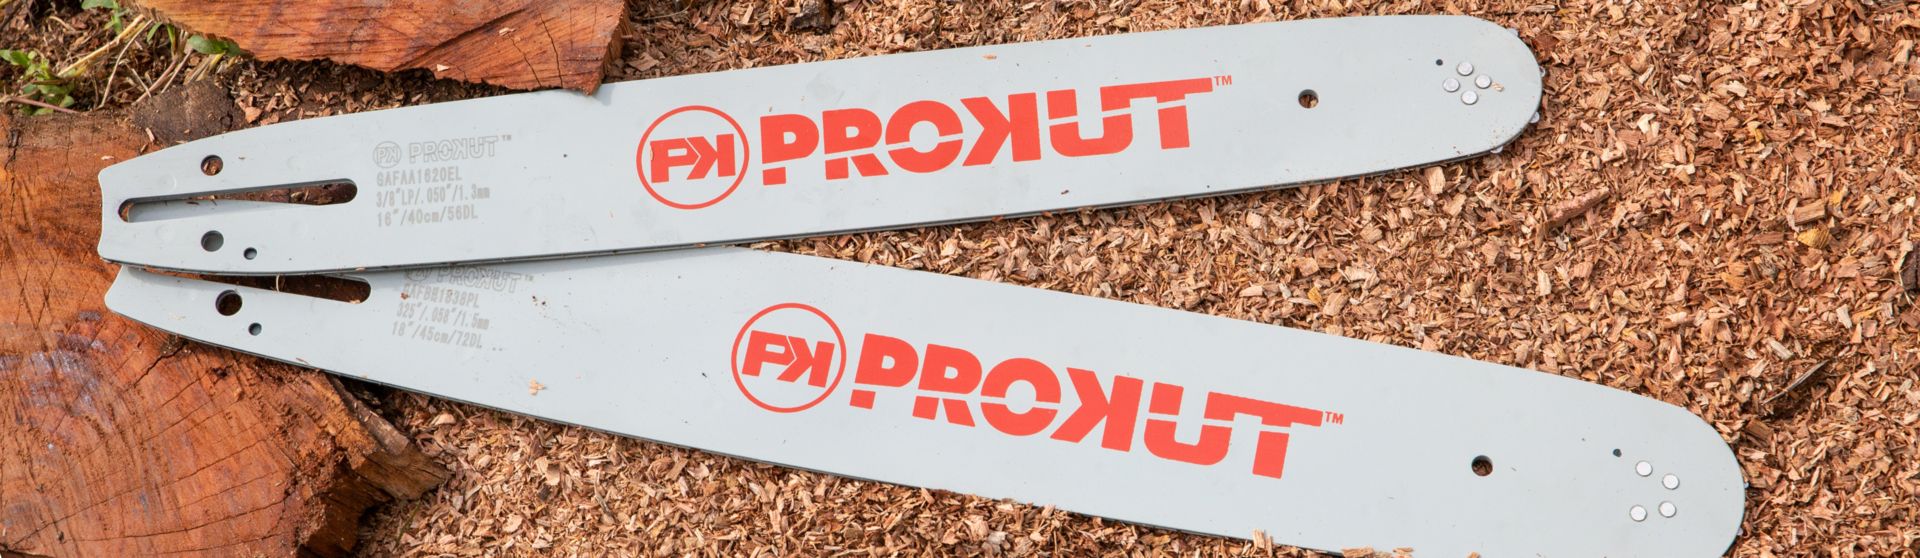 All PROKUT products are manufactured to exacting standards of strength, durability and quality. These products have been rigorously tested in Australia, so you have peace of mind the range can handle all job types.